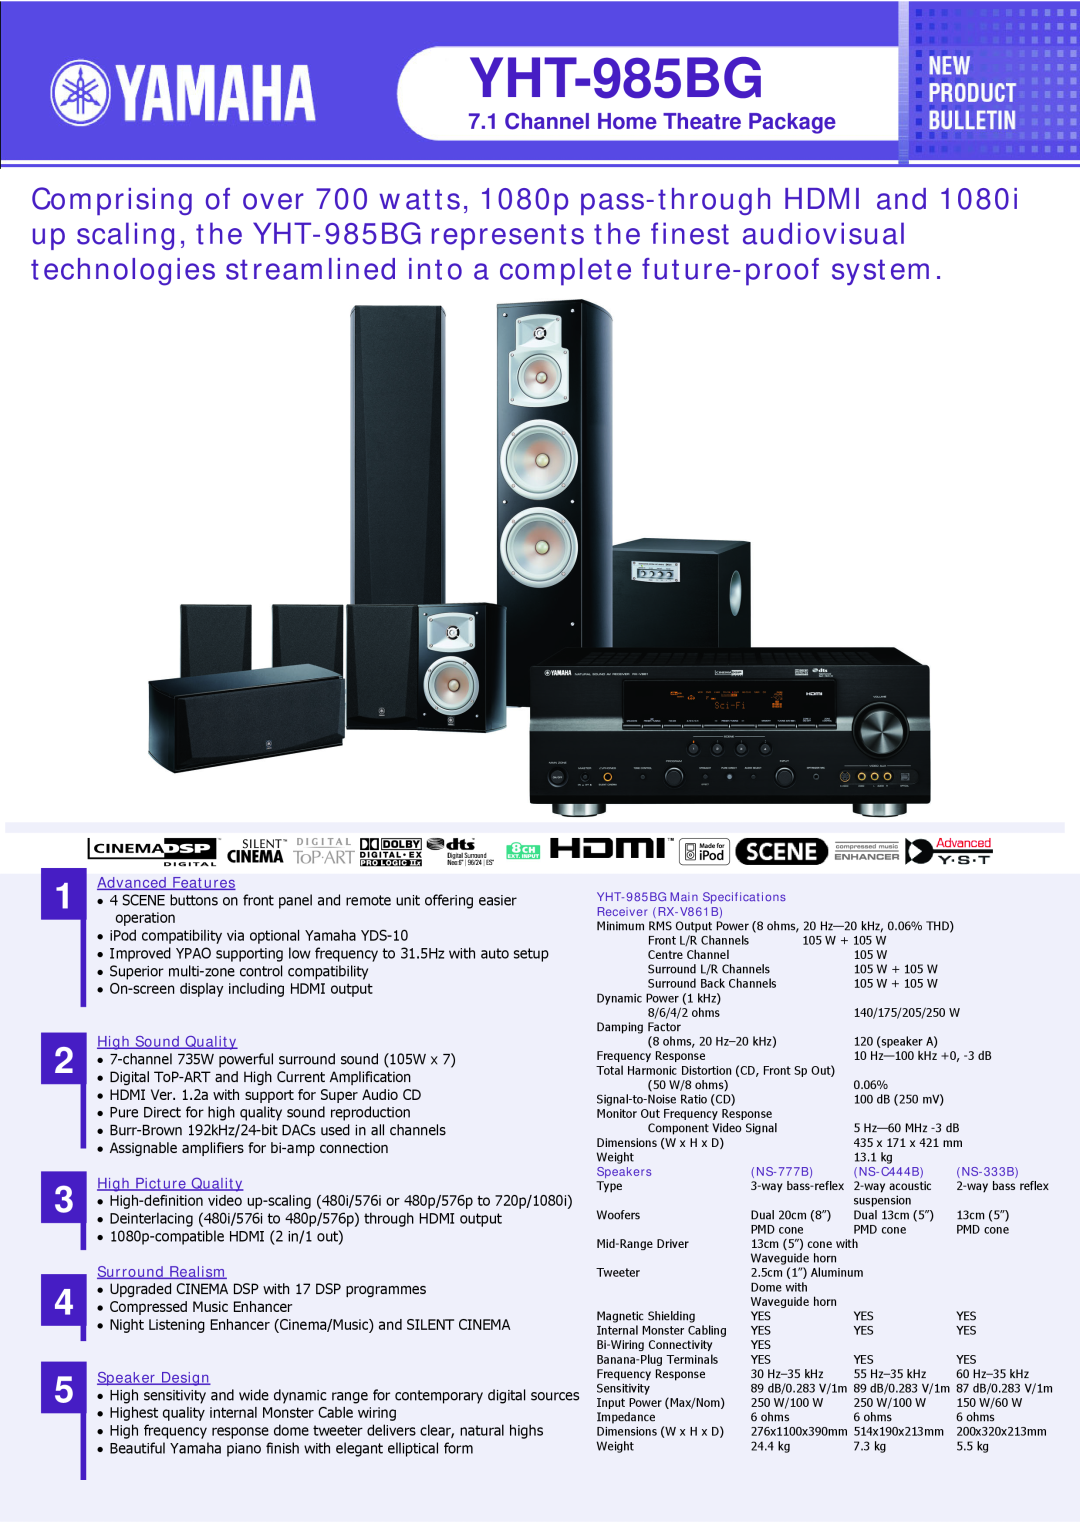 Yamaha YHT-985BG specifications Channel Home Theatre Package, Advanced Features, High Sound Quality, High Picture Quality 